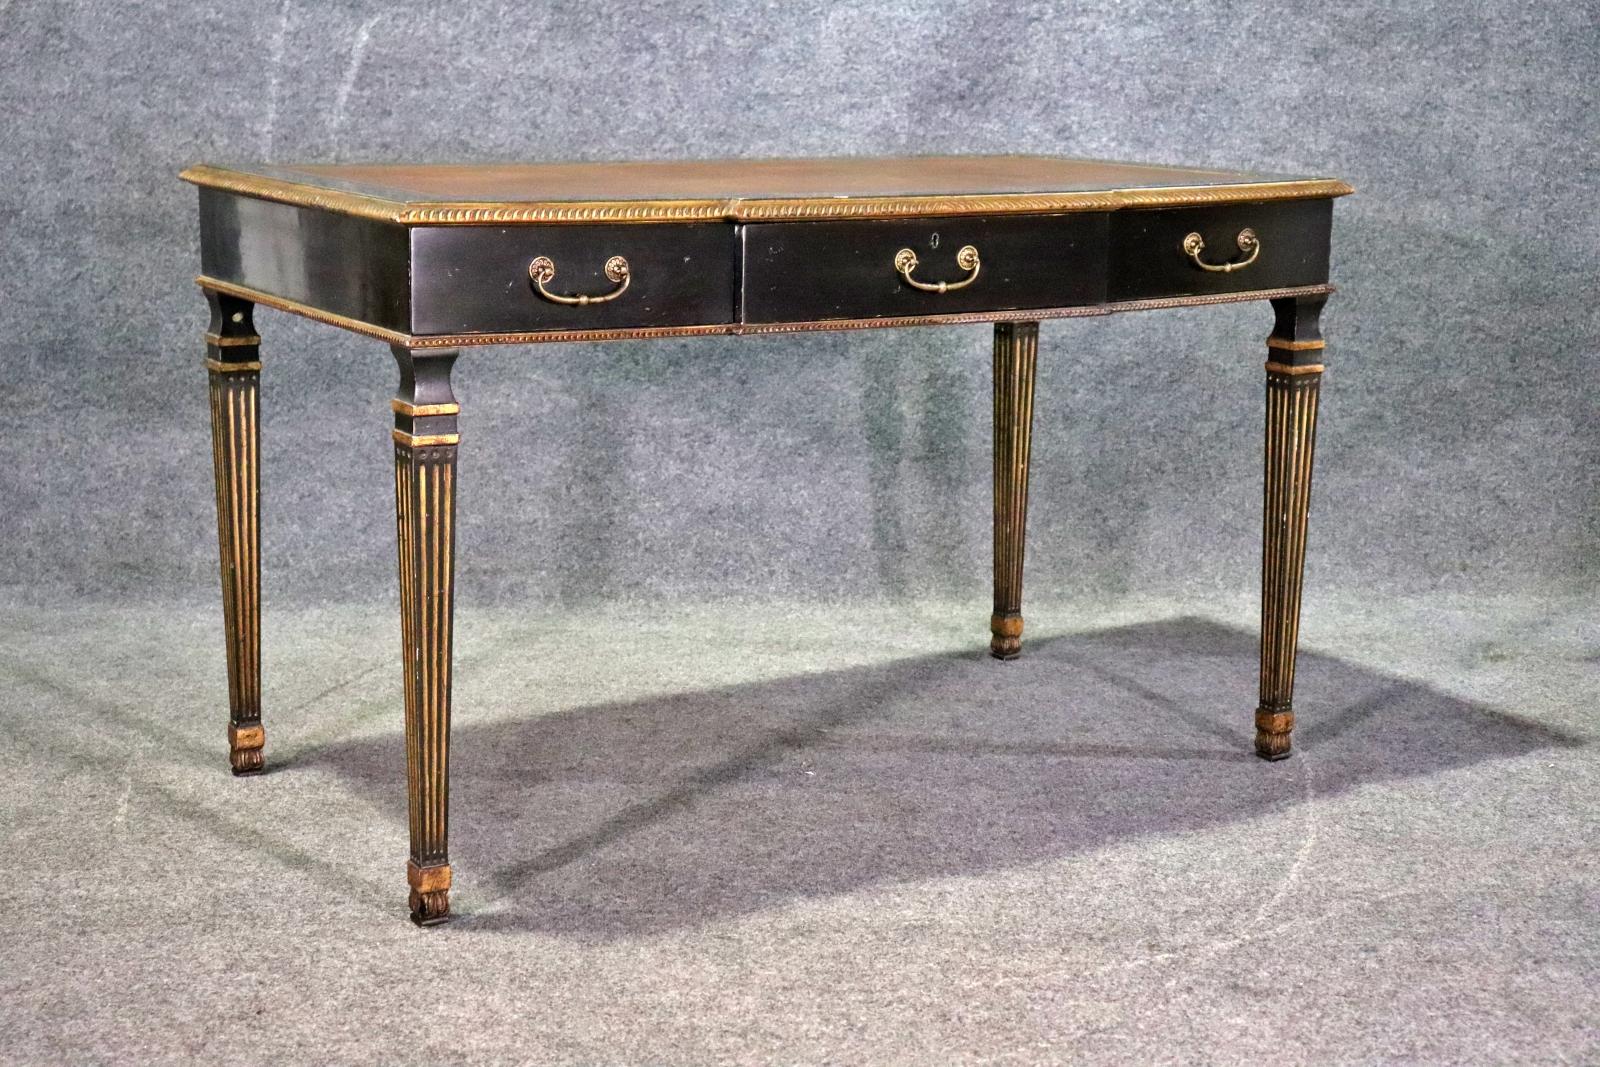 Neoclassical Revival French neoclassical style writing desk with leather top For Sale